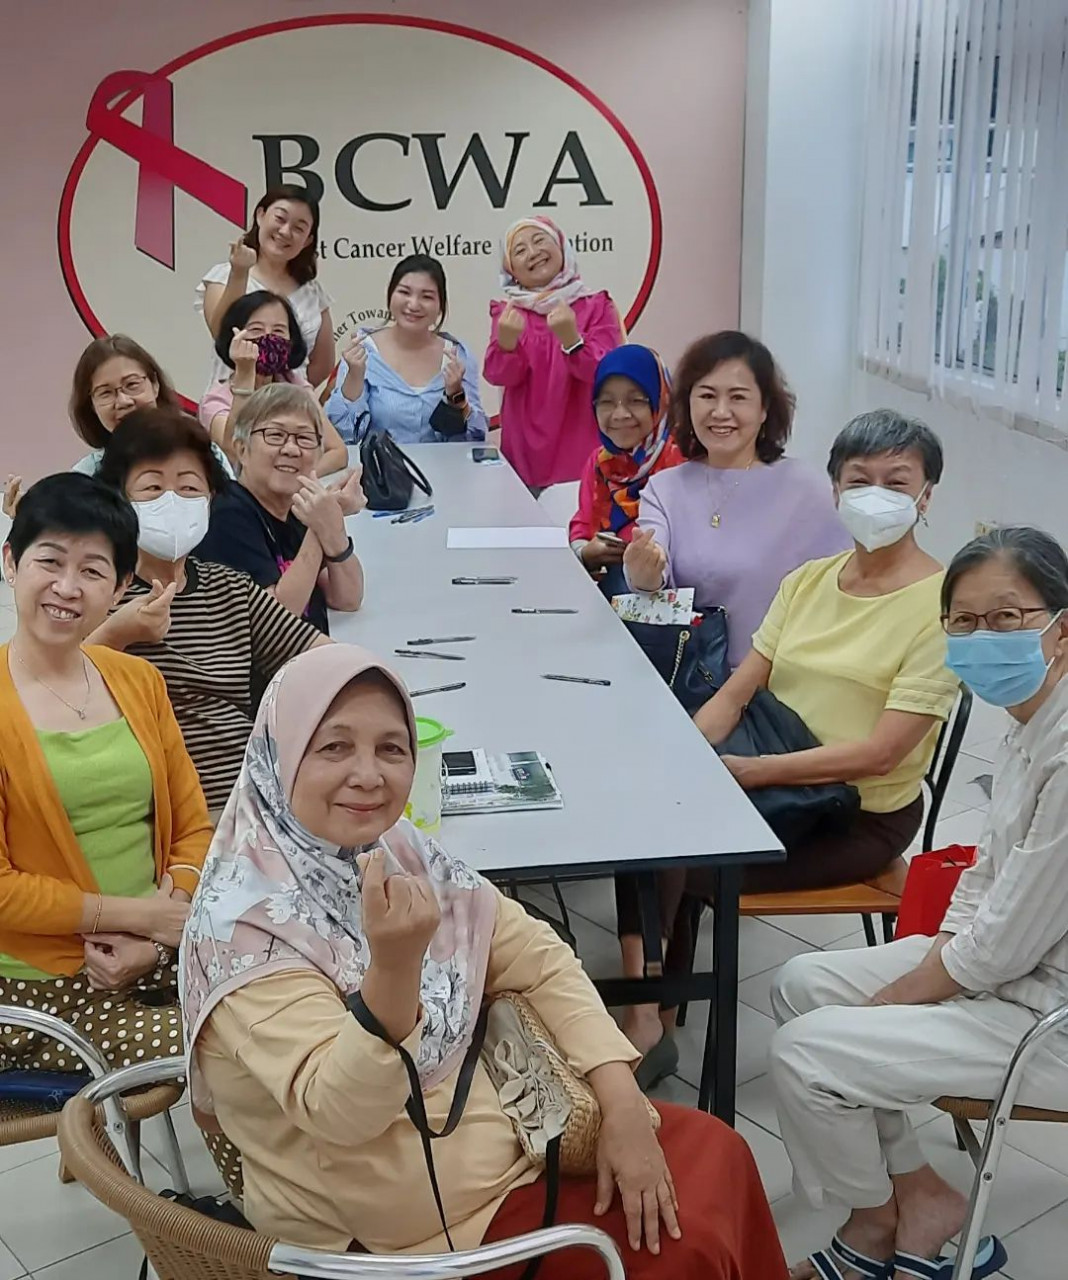 BCWA volunteers during a recent gathering. Some of their Patient Support volunteers have been serving BCWA for 20 years or more. – Facebook pic